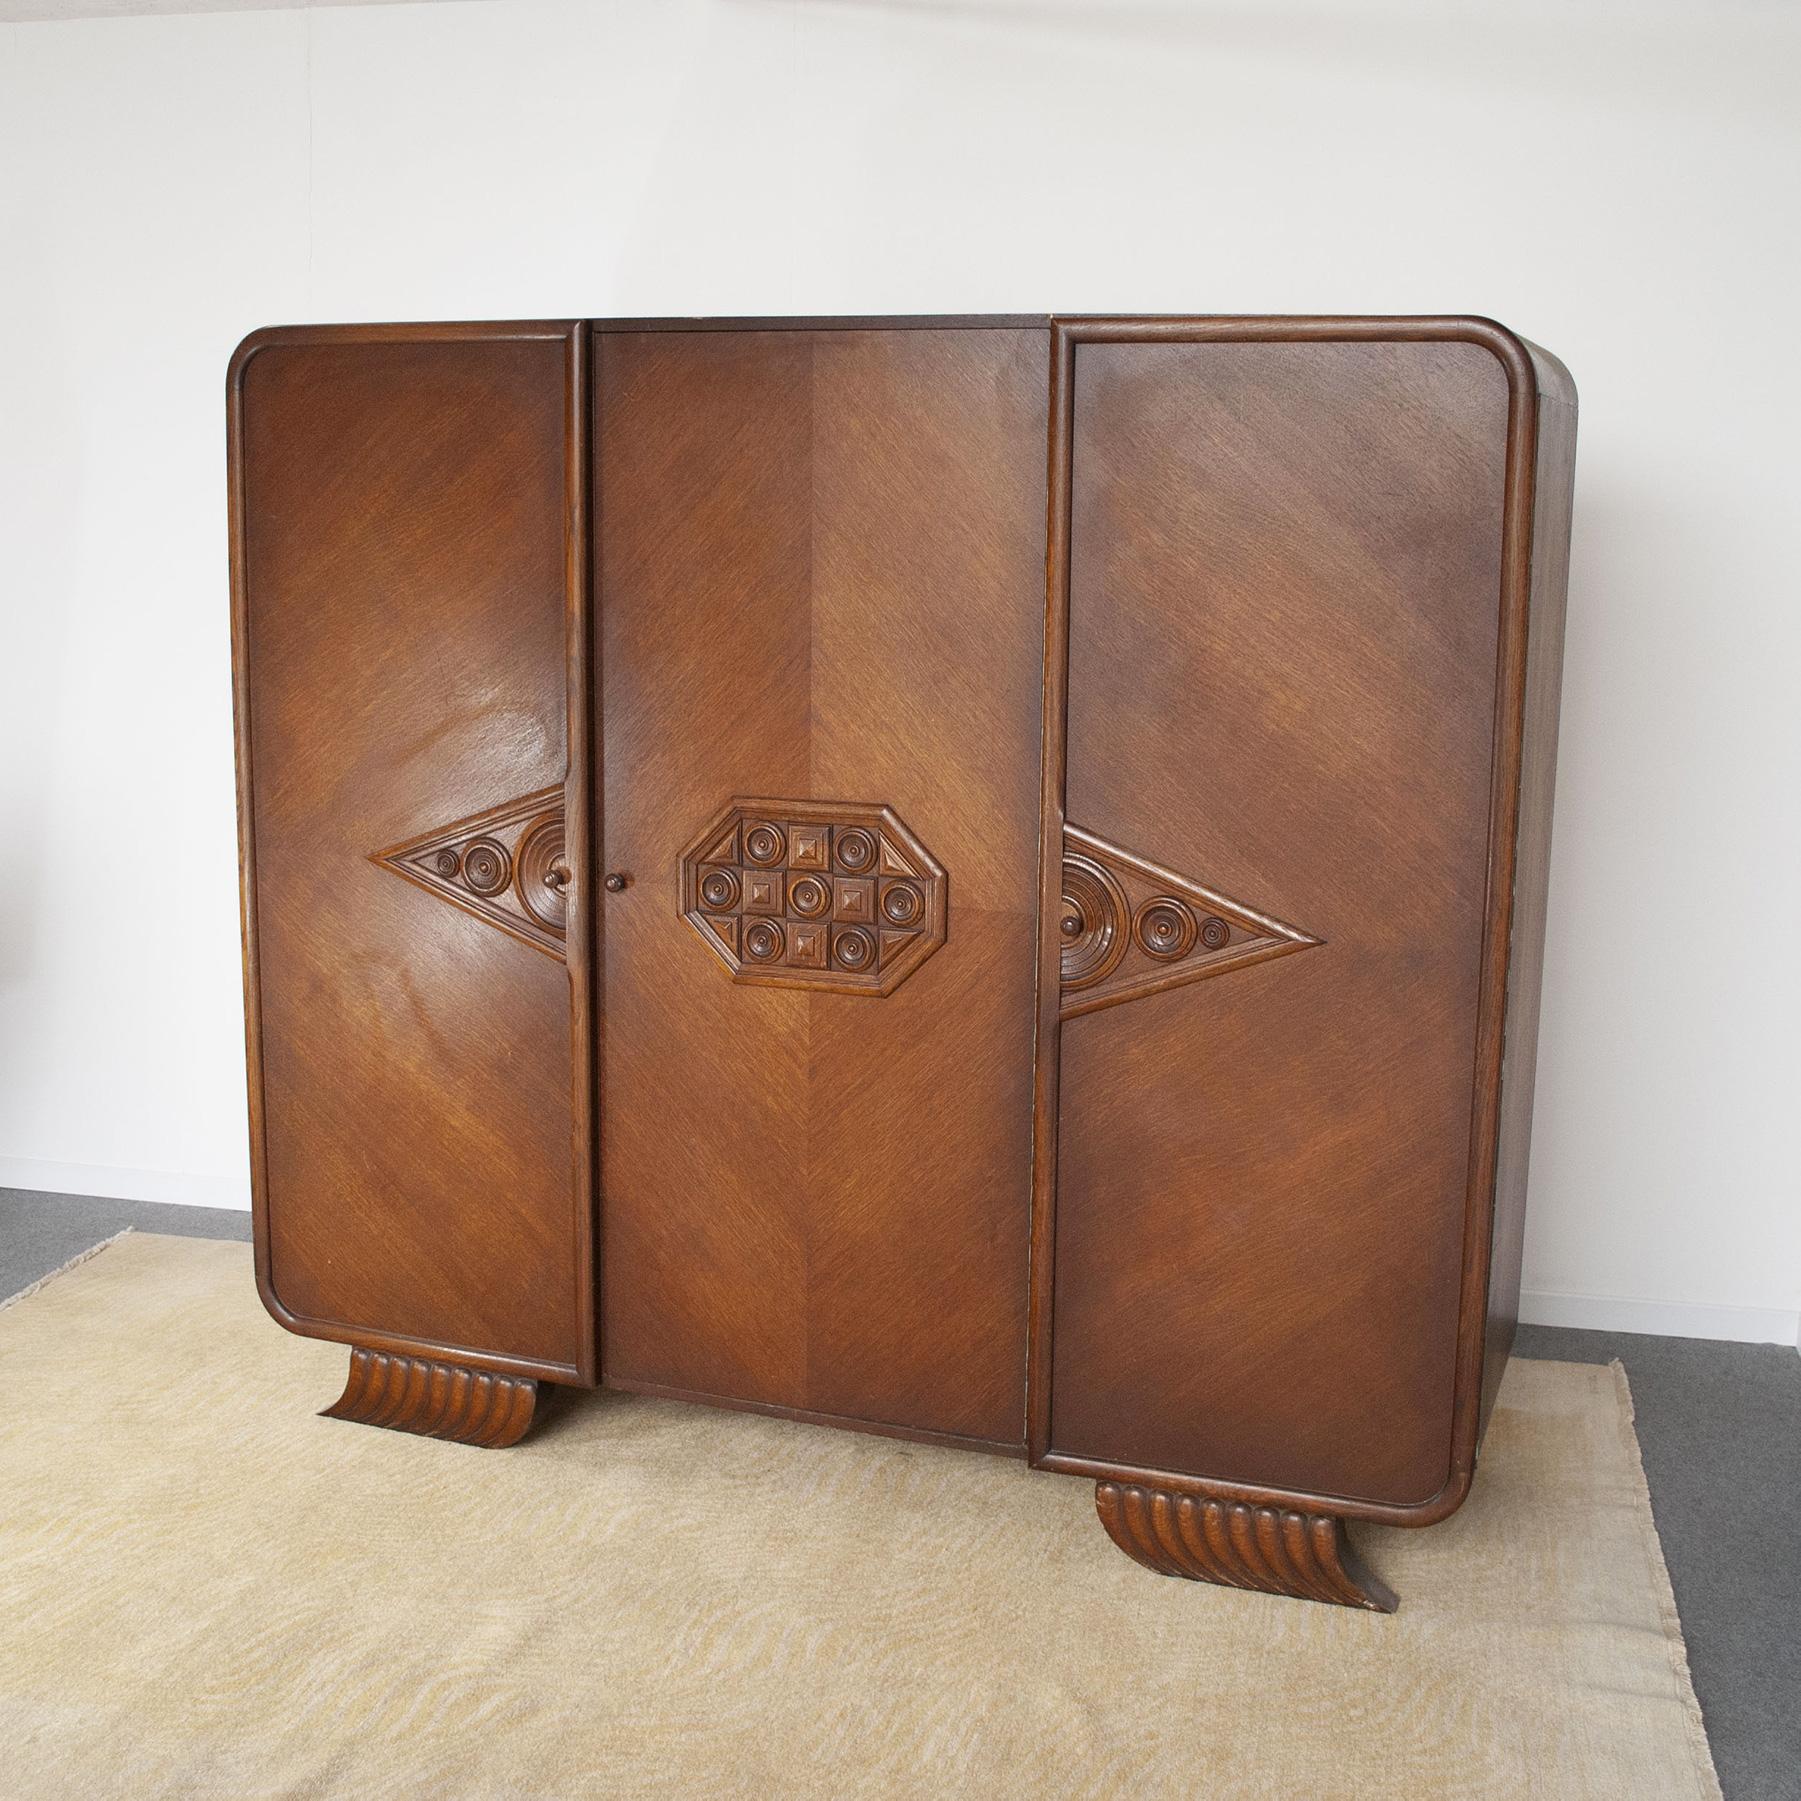 Original wardrobe consisting of three doors embellished with Art Deco style inlay designs, probably French production from the 1940s.